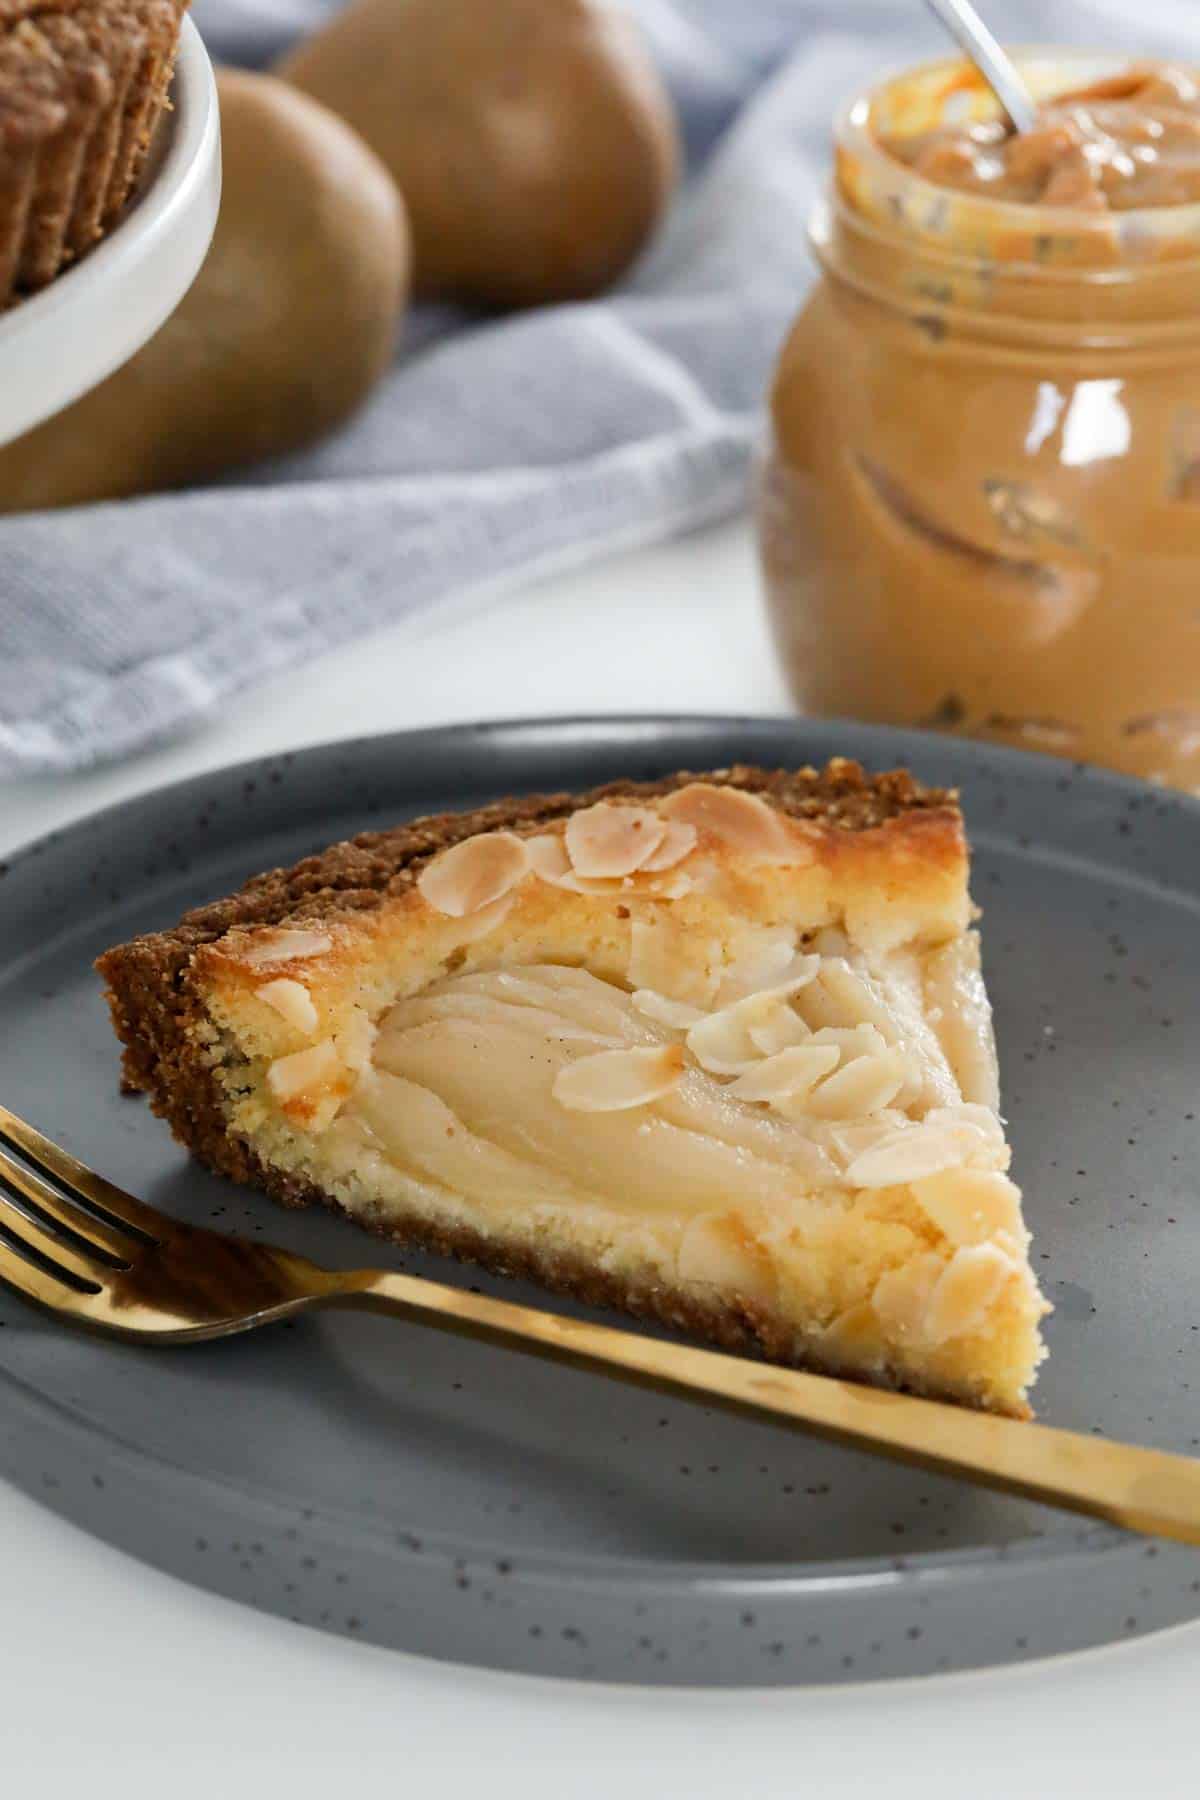 A slice of frangipane pie on a plate with a gold fork.